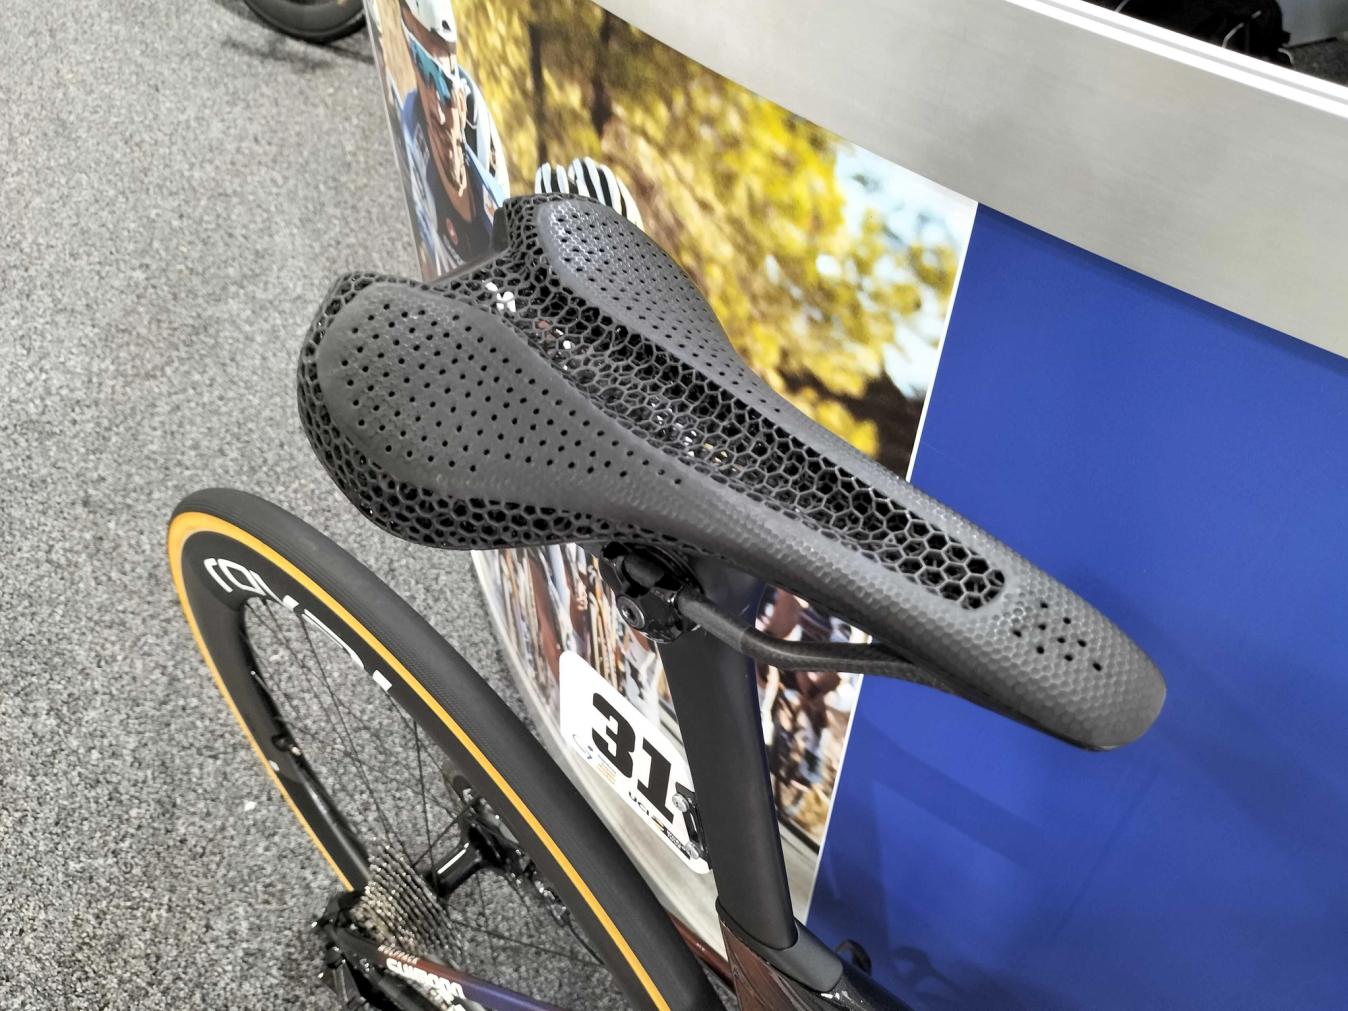 The Specialized Romin saddle